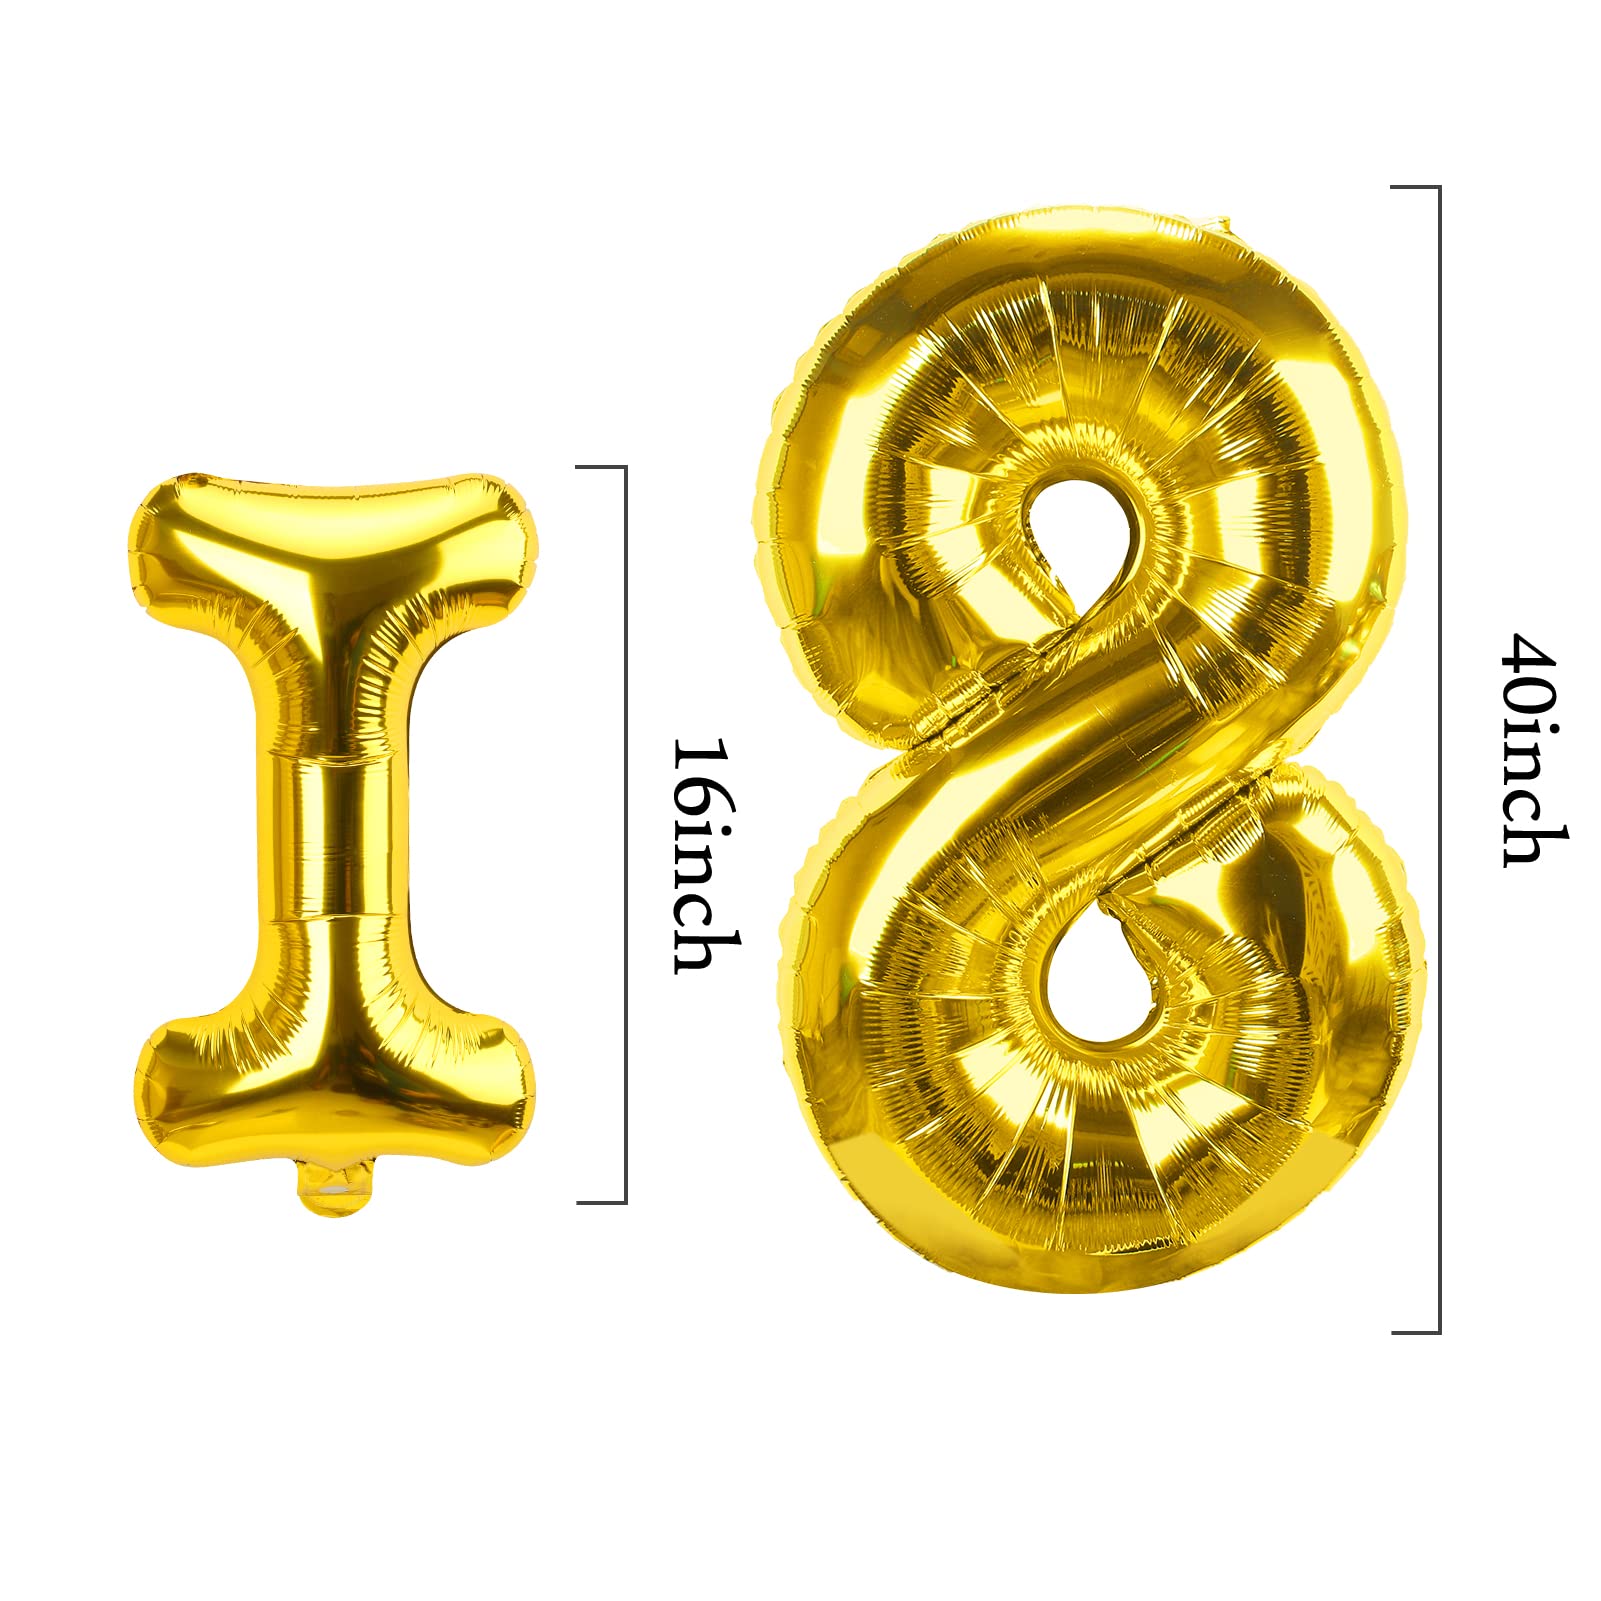 Zirtorei 40th Birthday Balloon Banner Decorations for Men Women, Gold Made in 1984 Balloon Happy 40 Birthday Sign Party Supplies, Forty Year Old Birthday Photo Props Background Decor